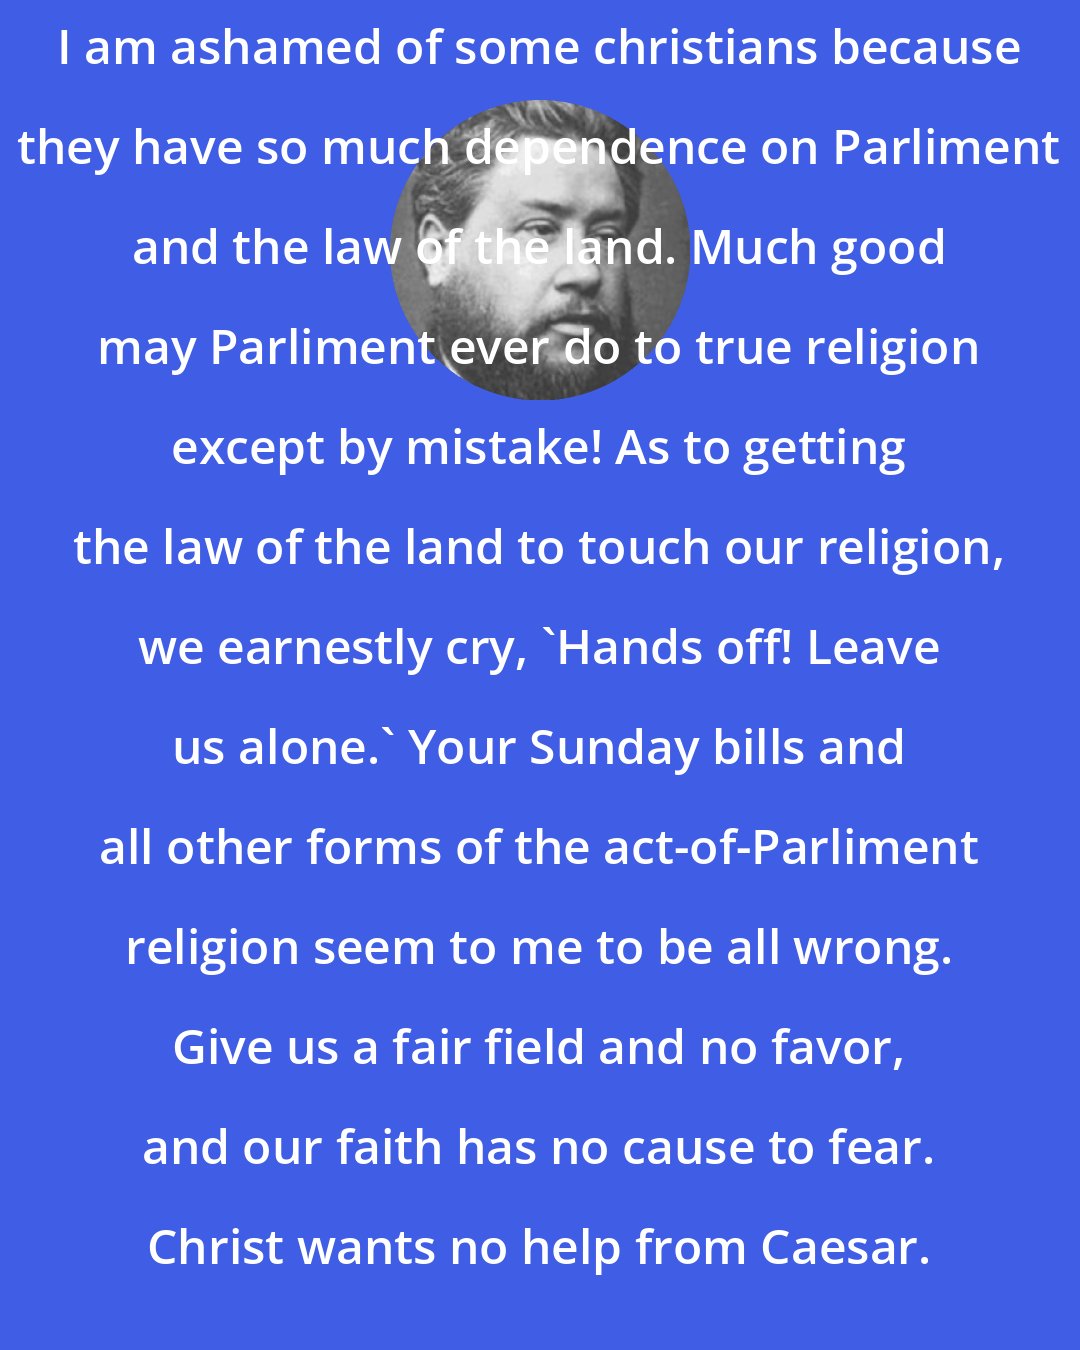 Charles Spurgeon: I am ashamed of some christians because they have so much dependence on Parliment and the law of the land. Much good may Parliment ever do to true religion except by mistake! As to getting the law of the land to touch our religion, we earnestly cry, `Hands off! Leave us alone.' Your Sunday bills and all other forms of the act-of-Parliment religion seem to me to be all wrong. Give us a fair field and no favor, and our faith has no cause to fear. Christ wants no help from Caesar.